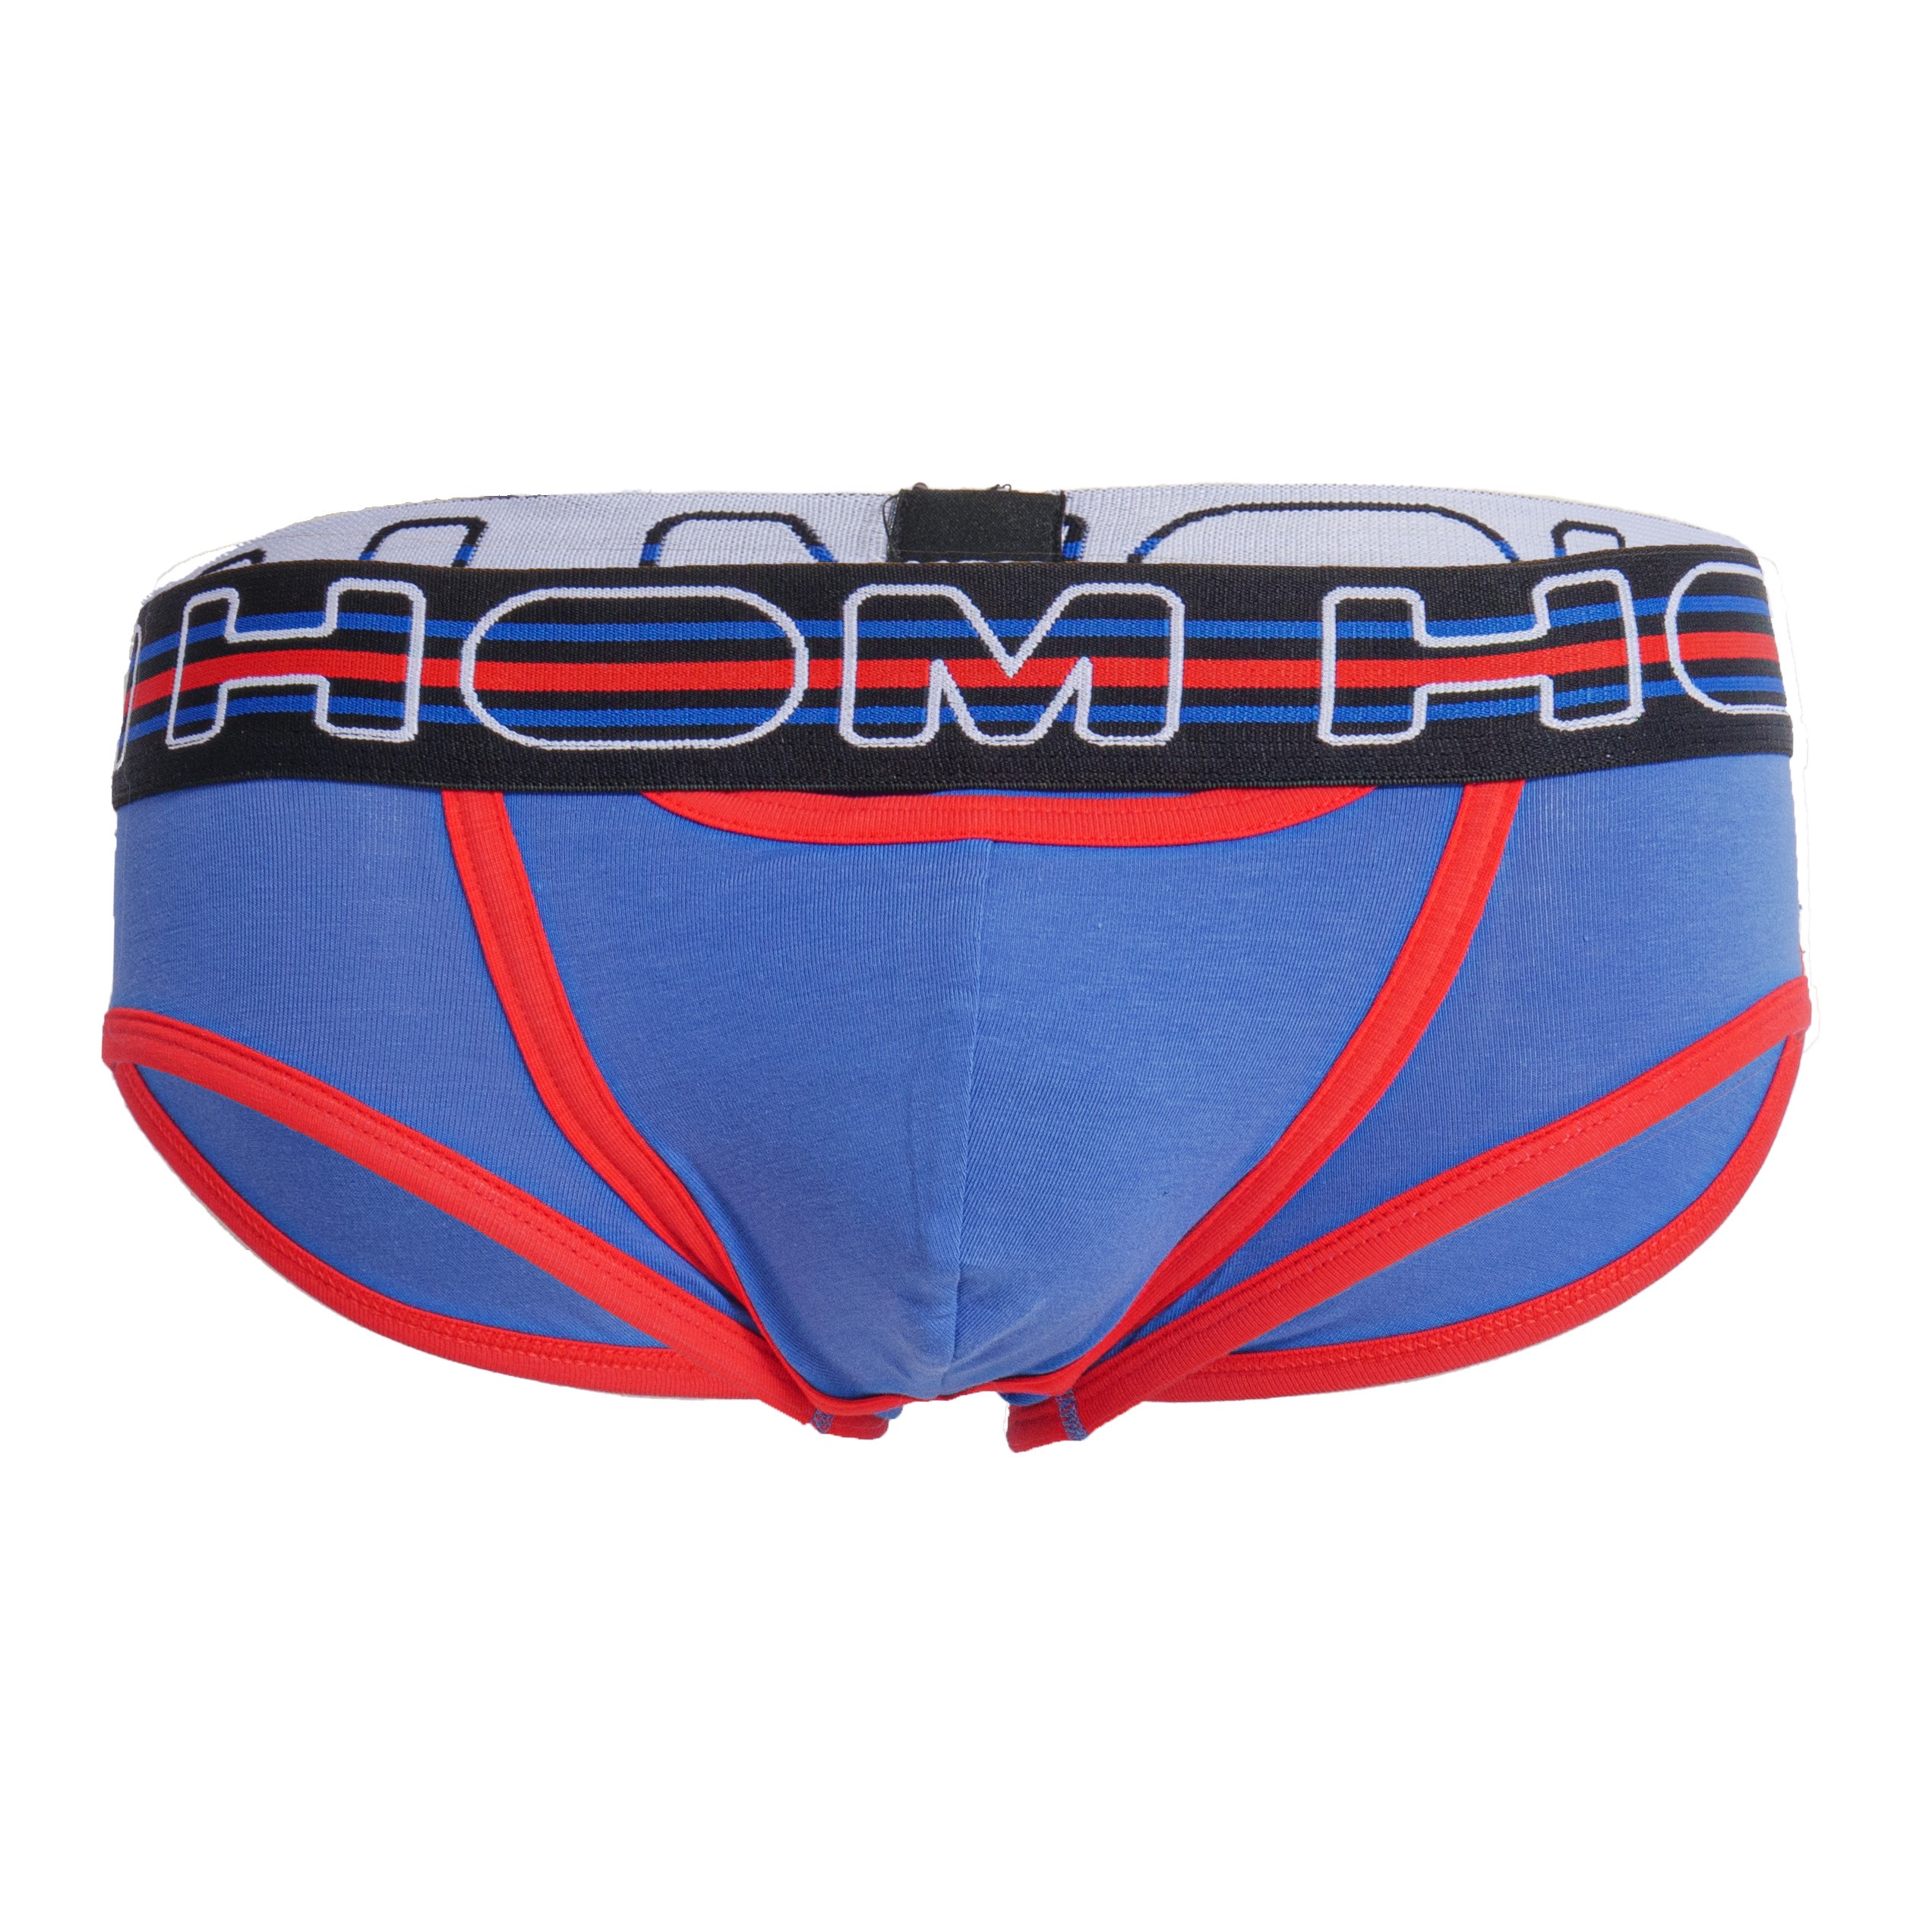 Mini briefs HO1 Cotton up LIMITED EDITION - blue: Briefs for man br